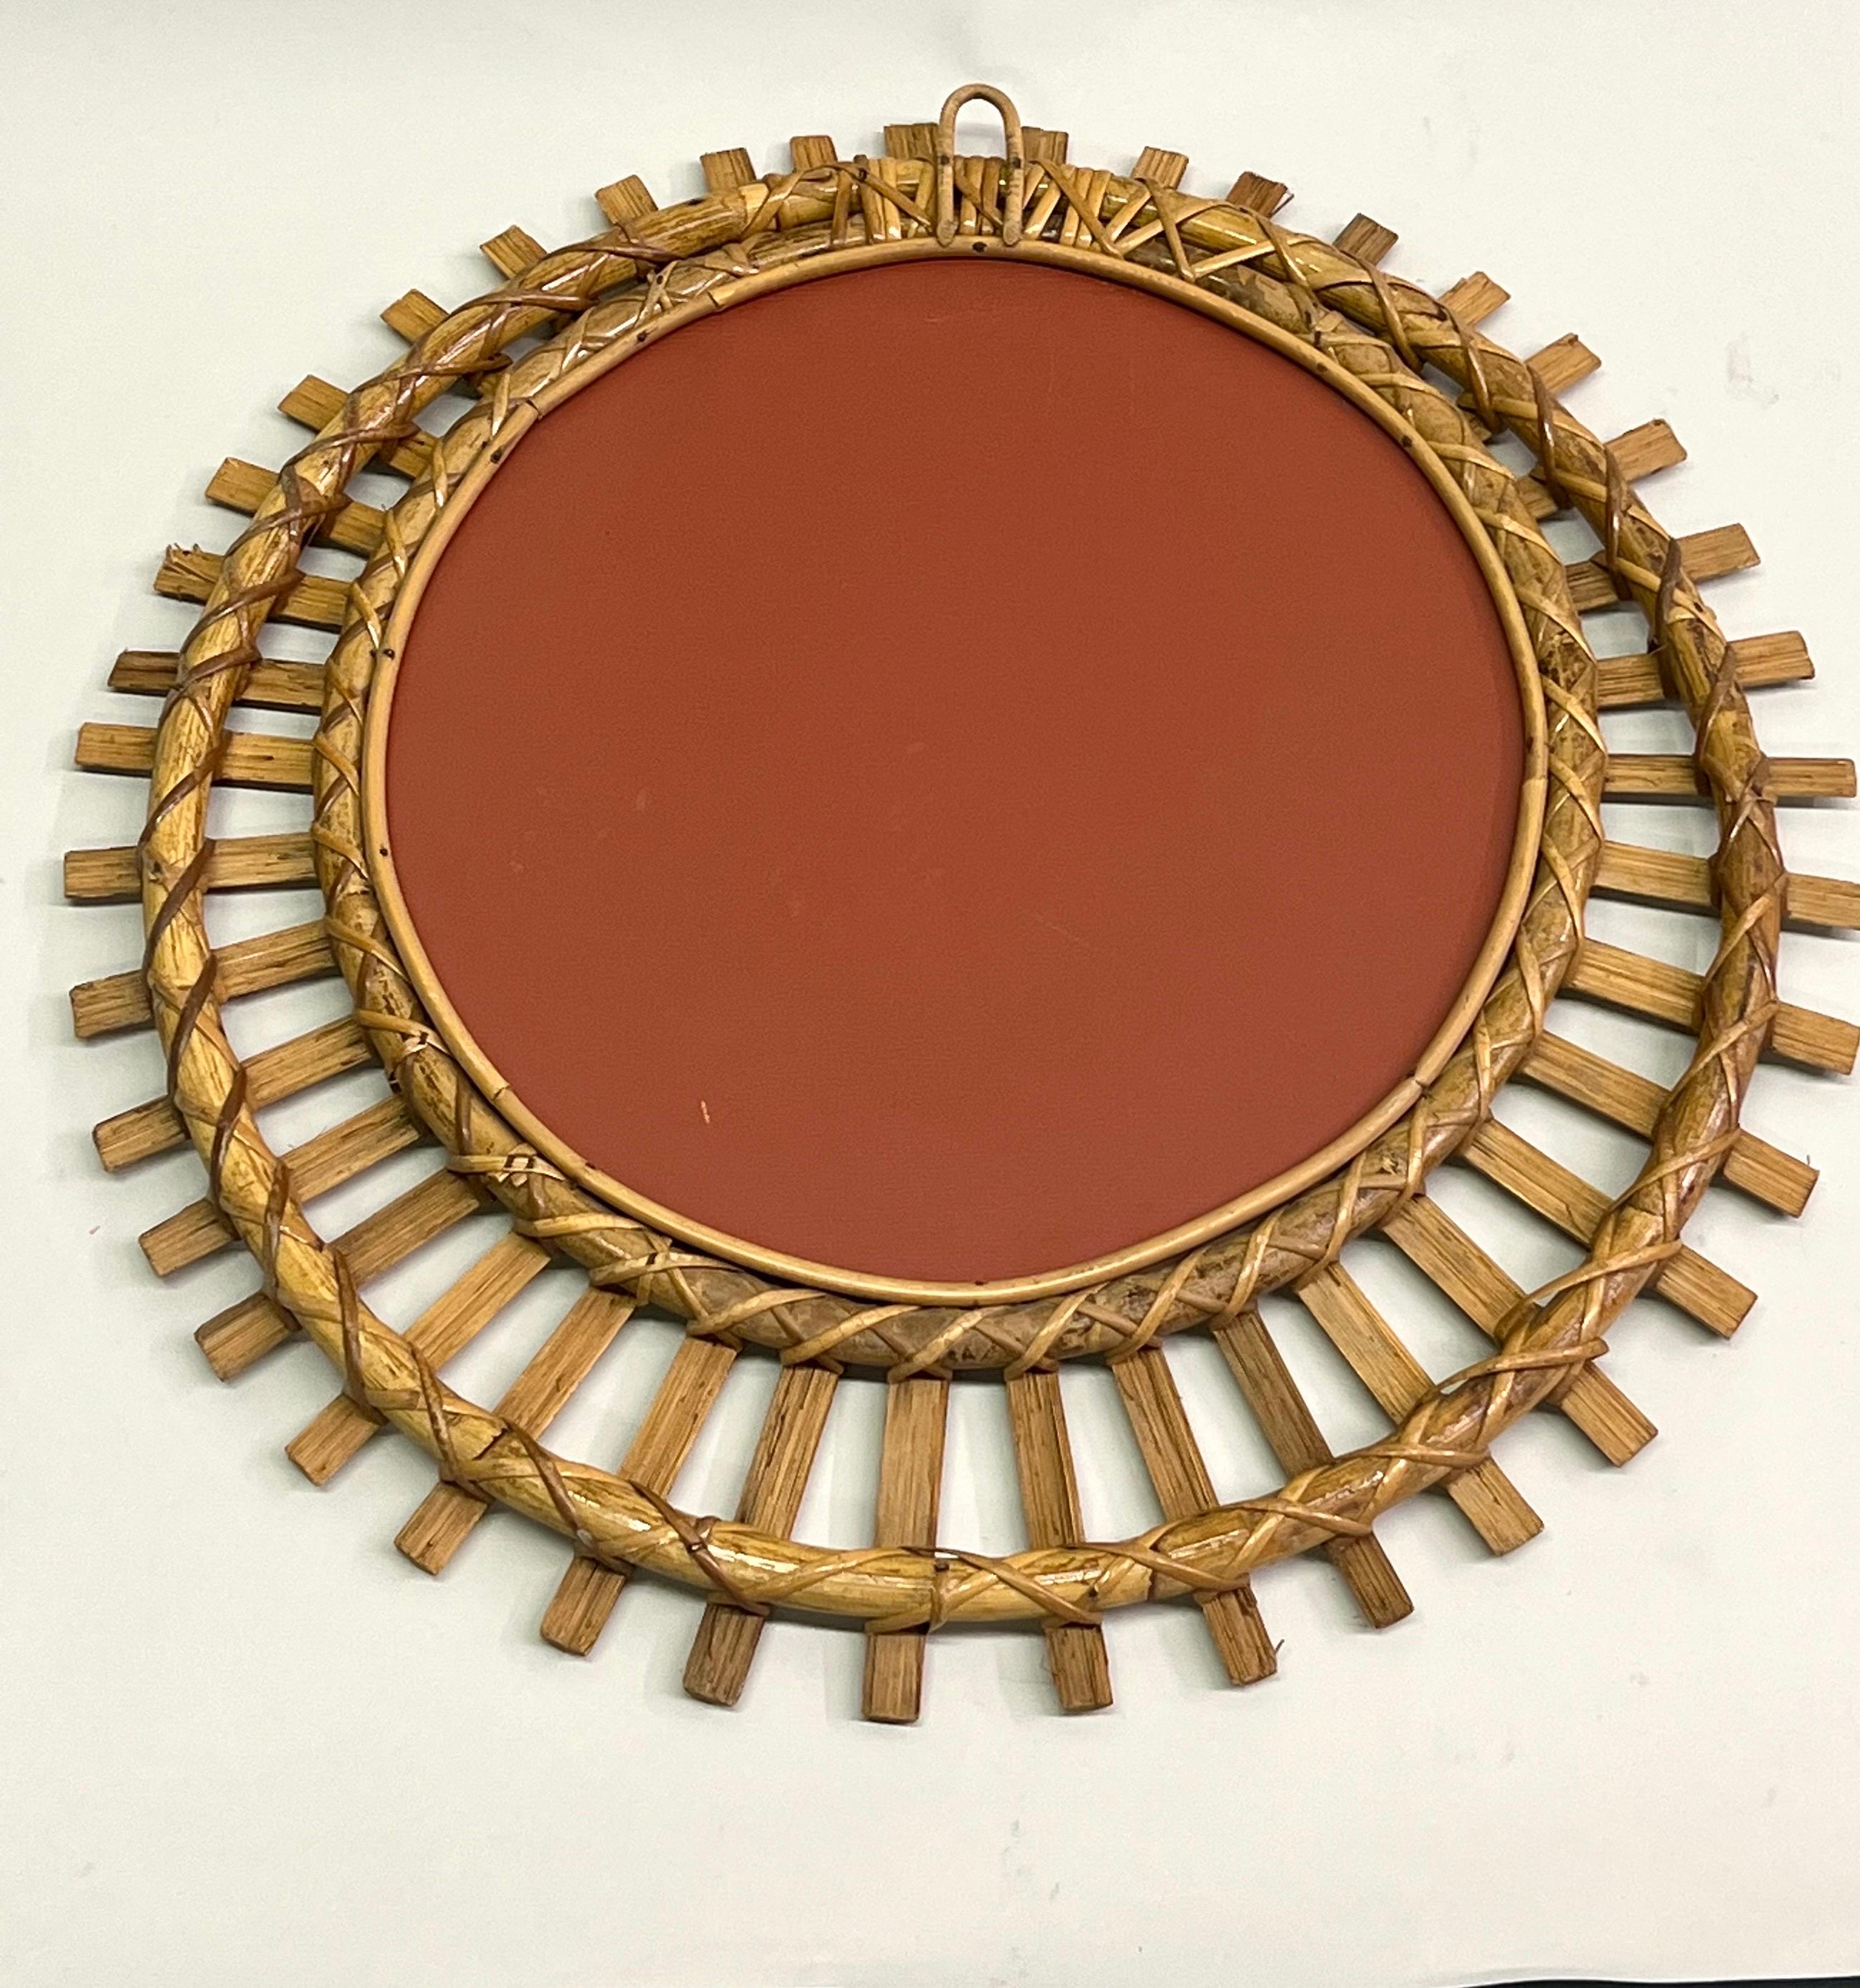 20th Century French Mid-Century Modern Neoclassical Bamboo and Rattan Sunburst Mirror, Arbus For Sale